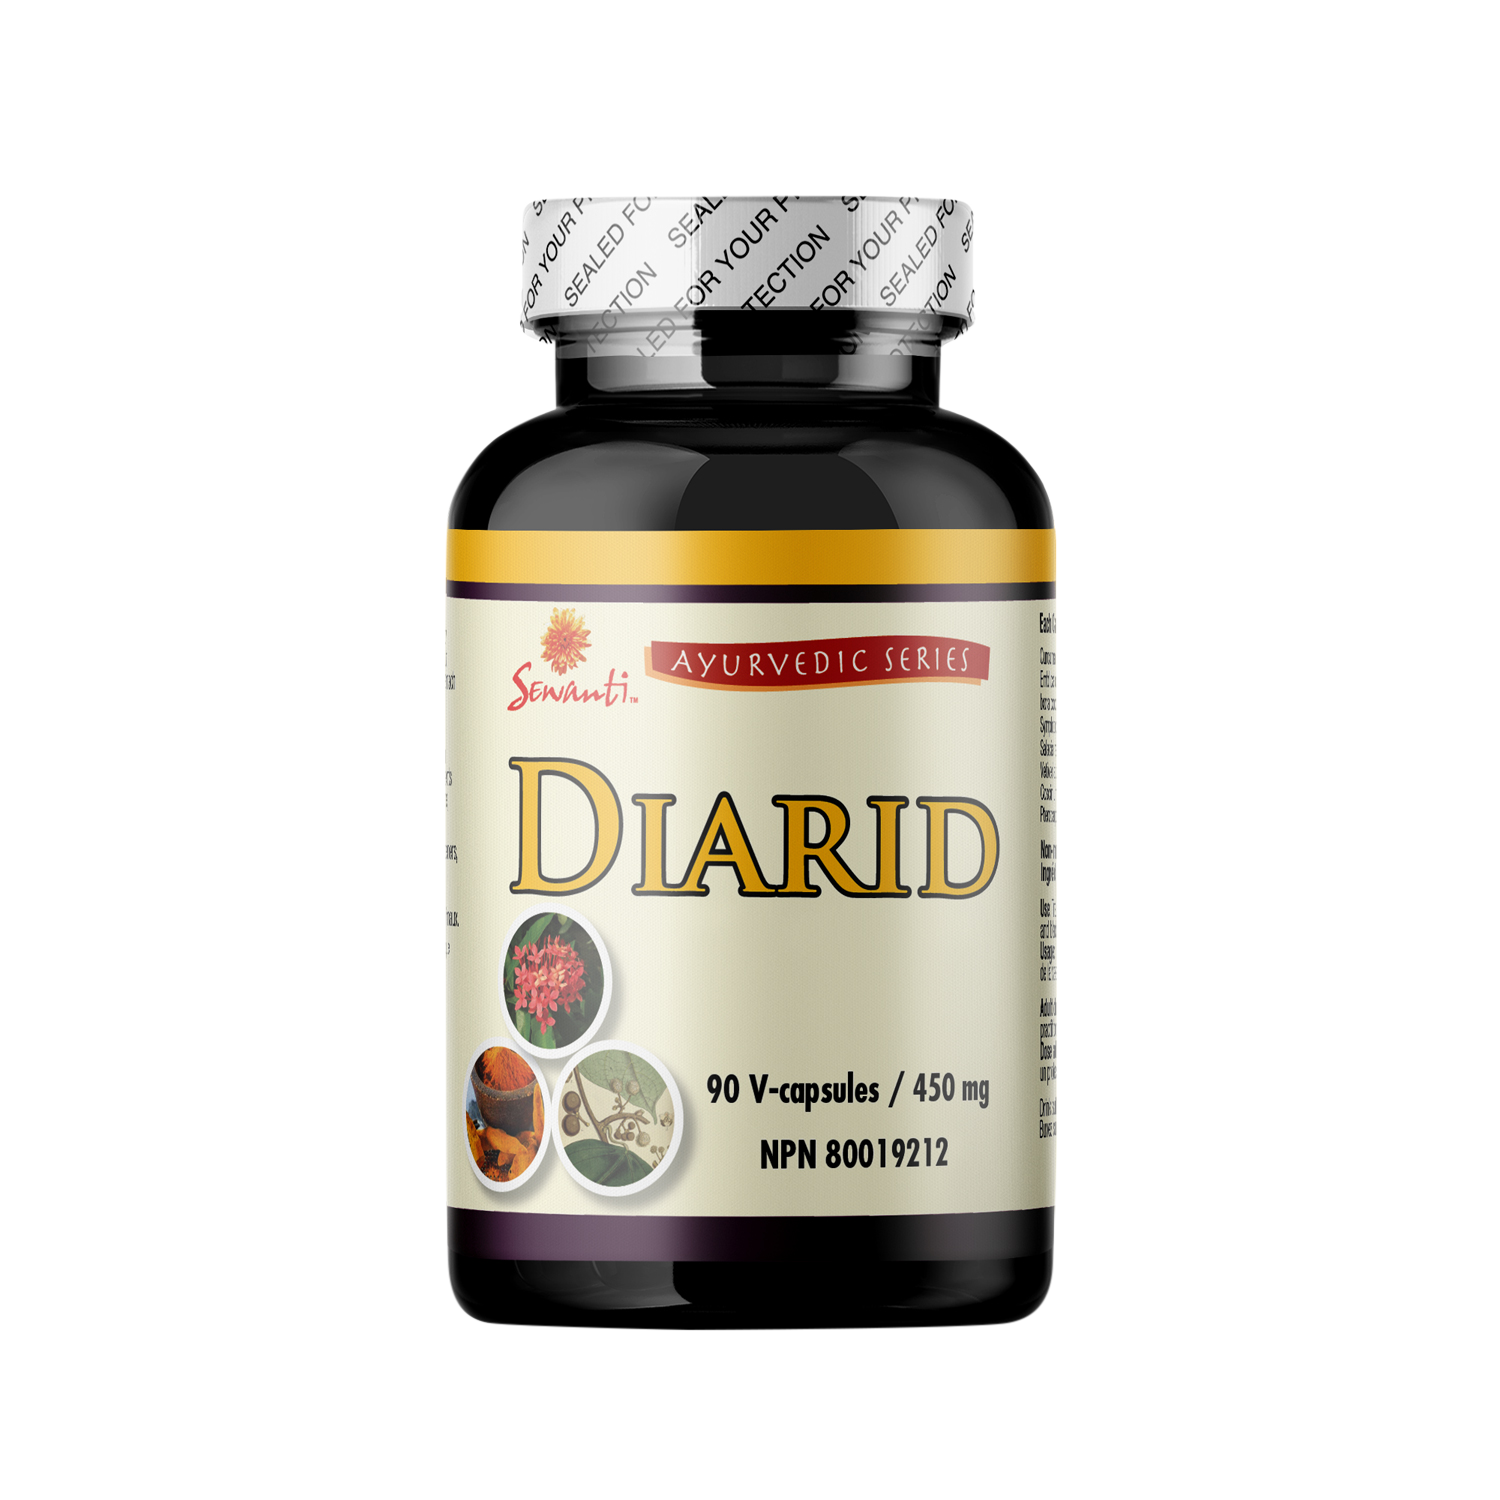 Ayurvedic Diarid Capsules for Kidneys & Bladder - The kidneys, bladder, urethra, and ureter form the urinary system which is responsible for eliminating toxins and wastes from the body